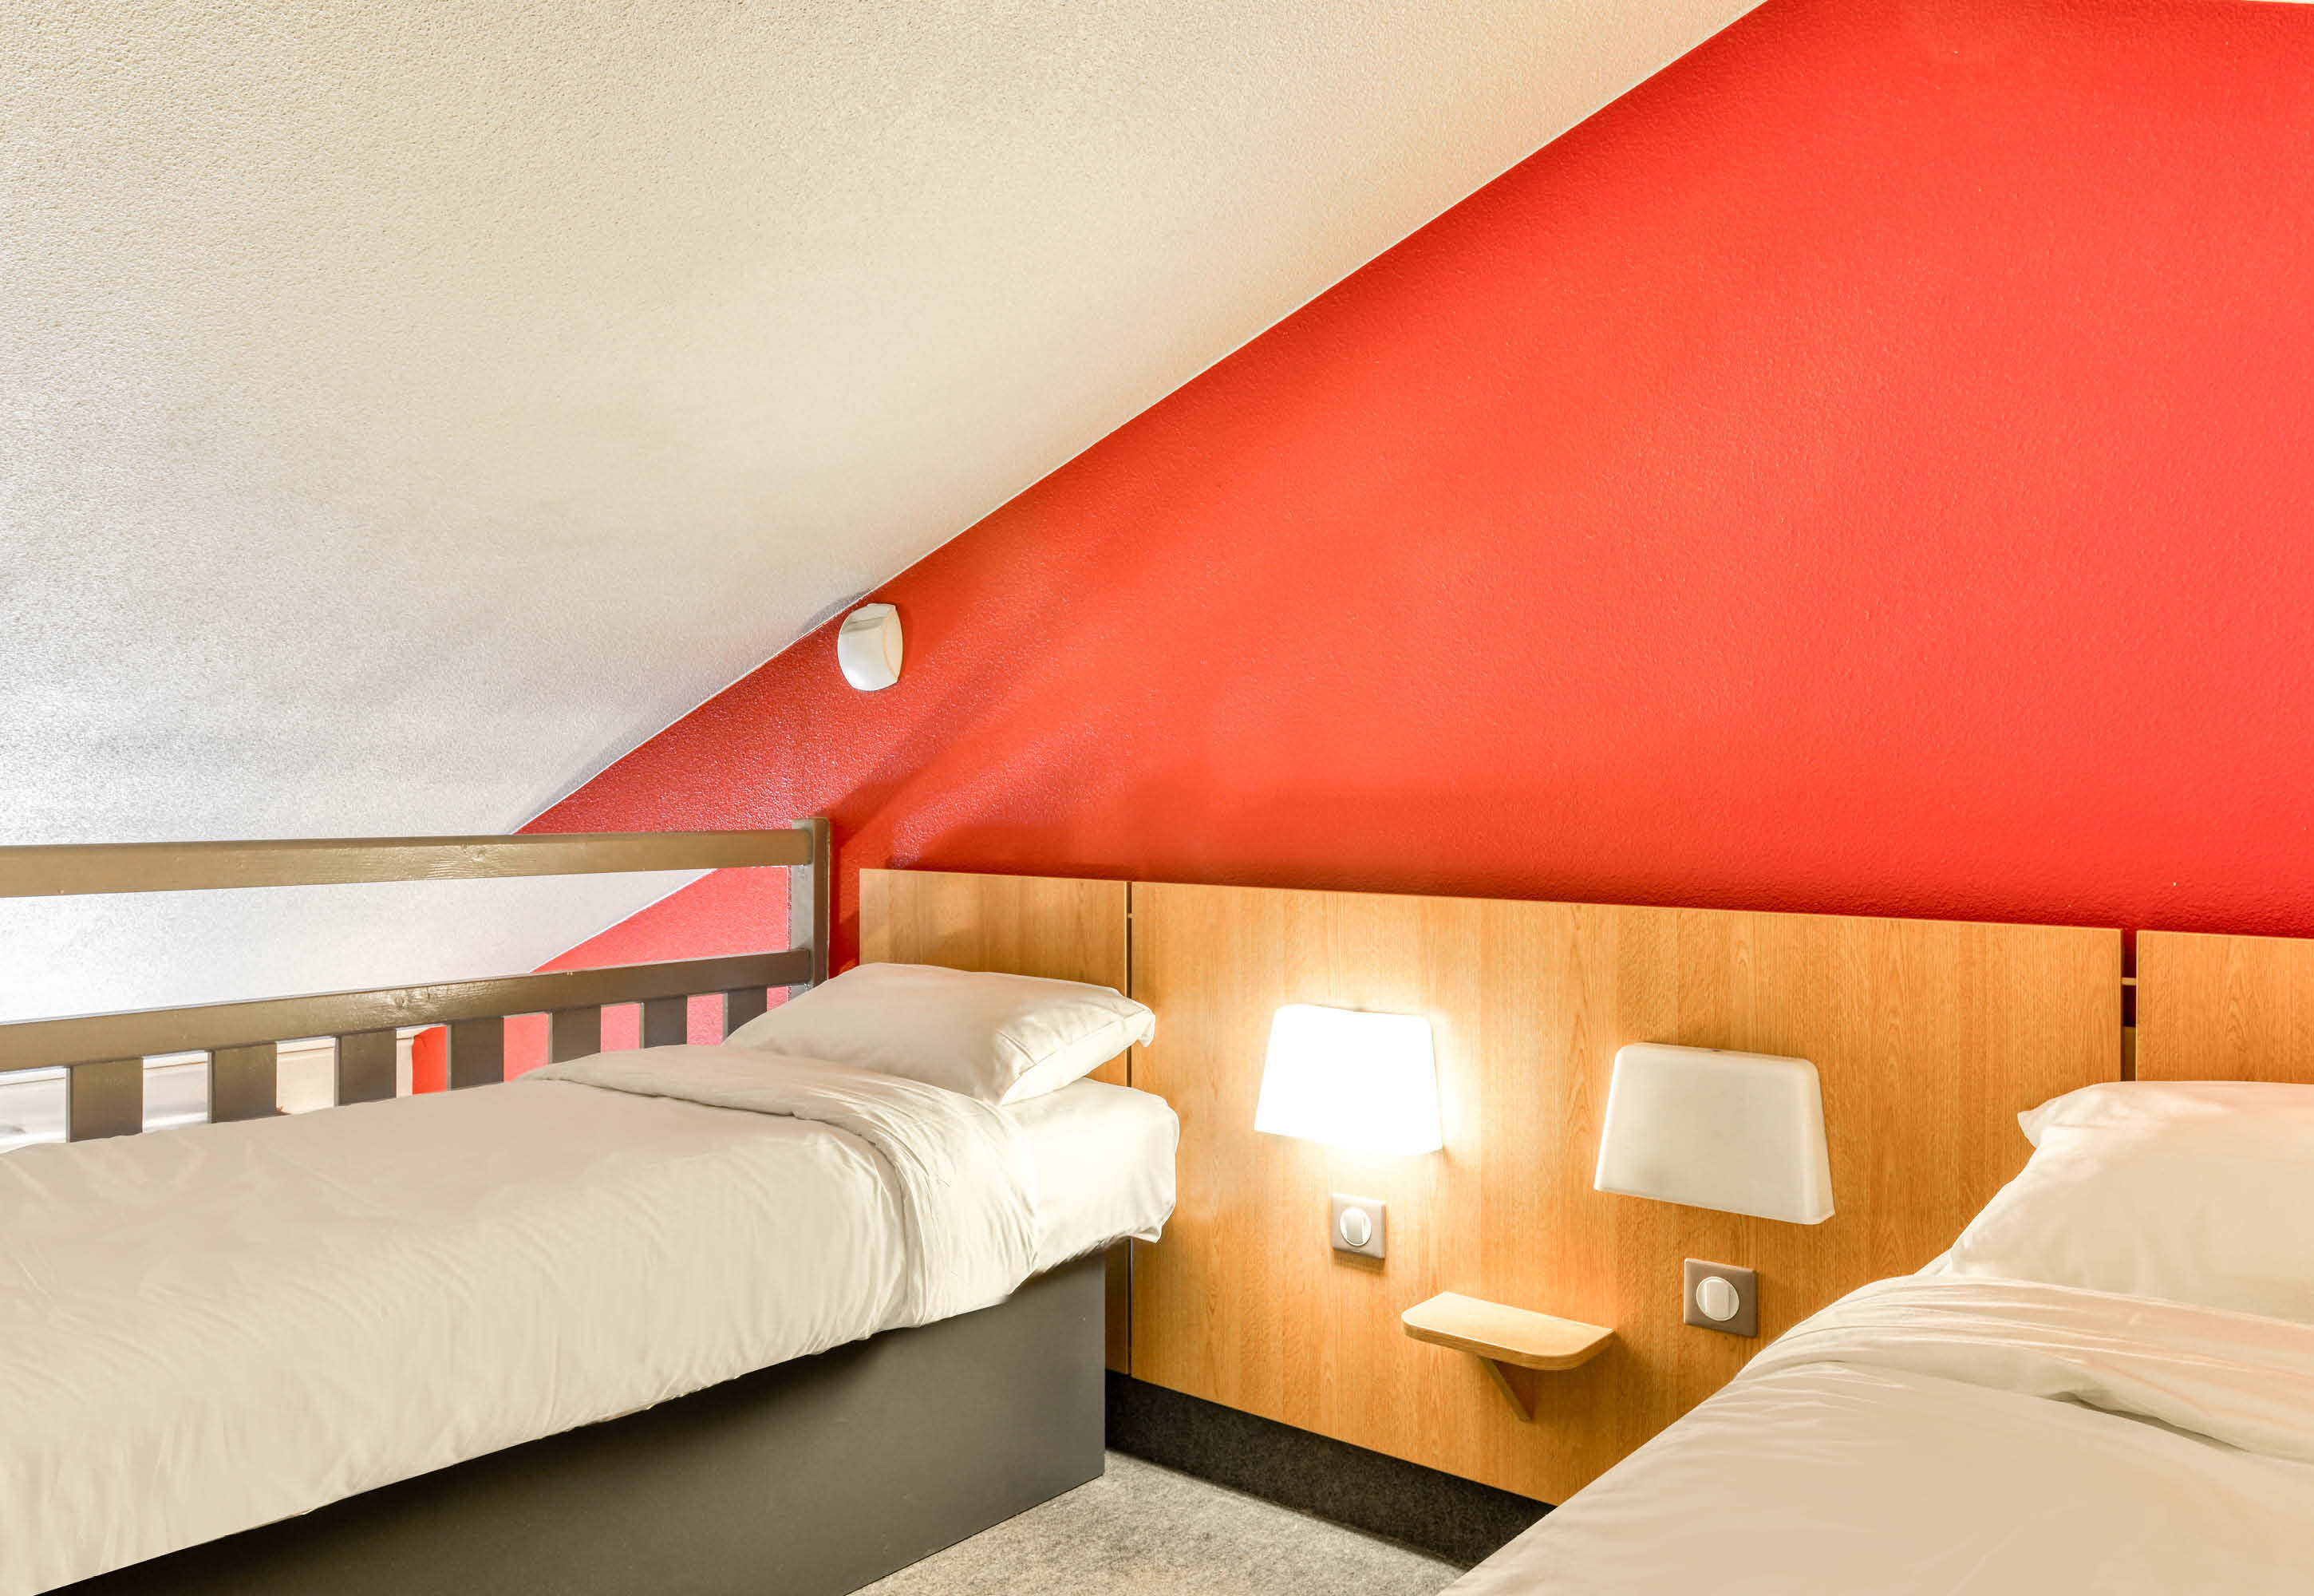 Images B&B HOTEL Montpellier 2